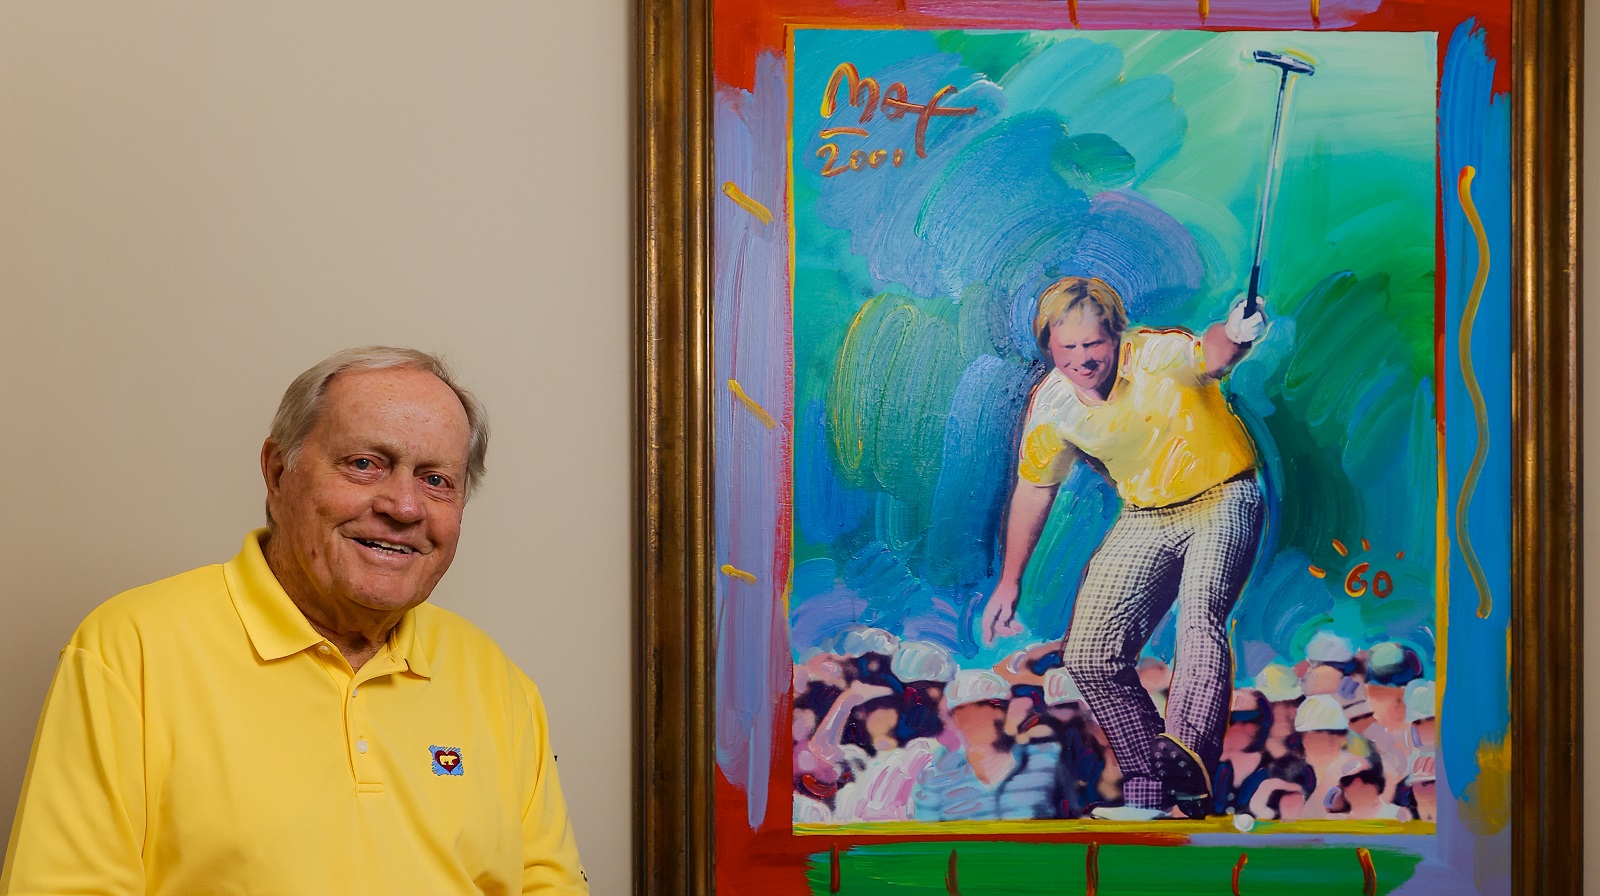 Jack Nicklaus poses for a portrait at the Nicklaus Family Office on March 28, 2022, in North Palm Beach, Florida.